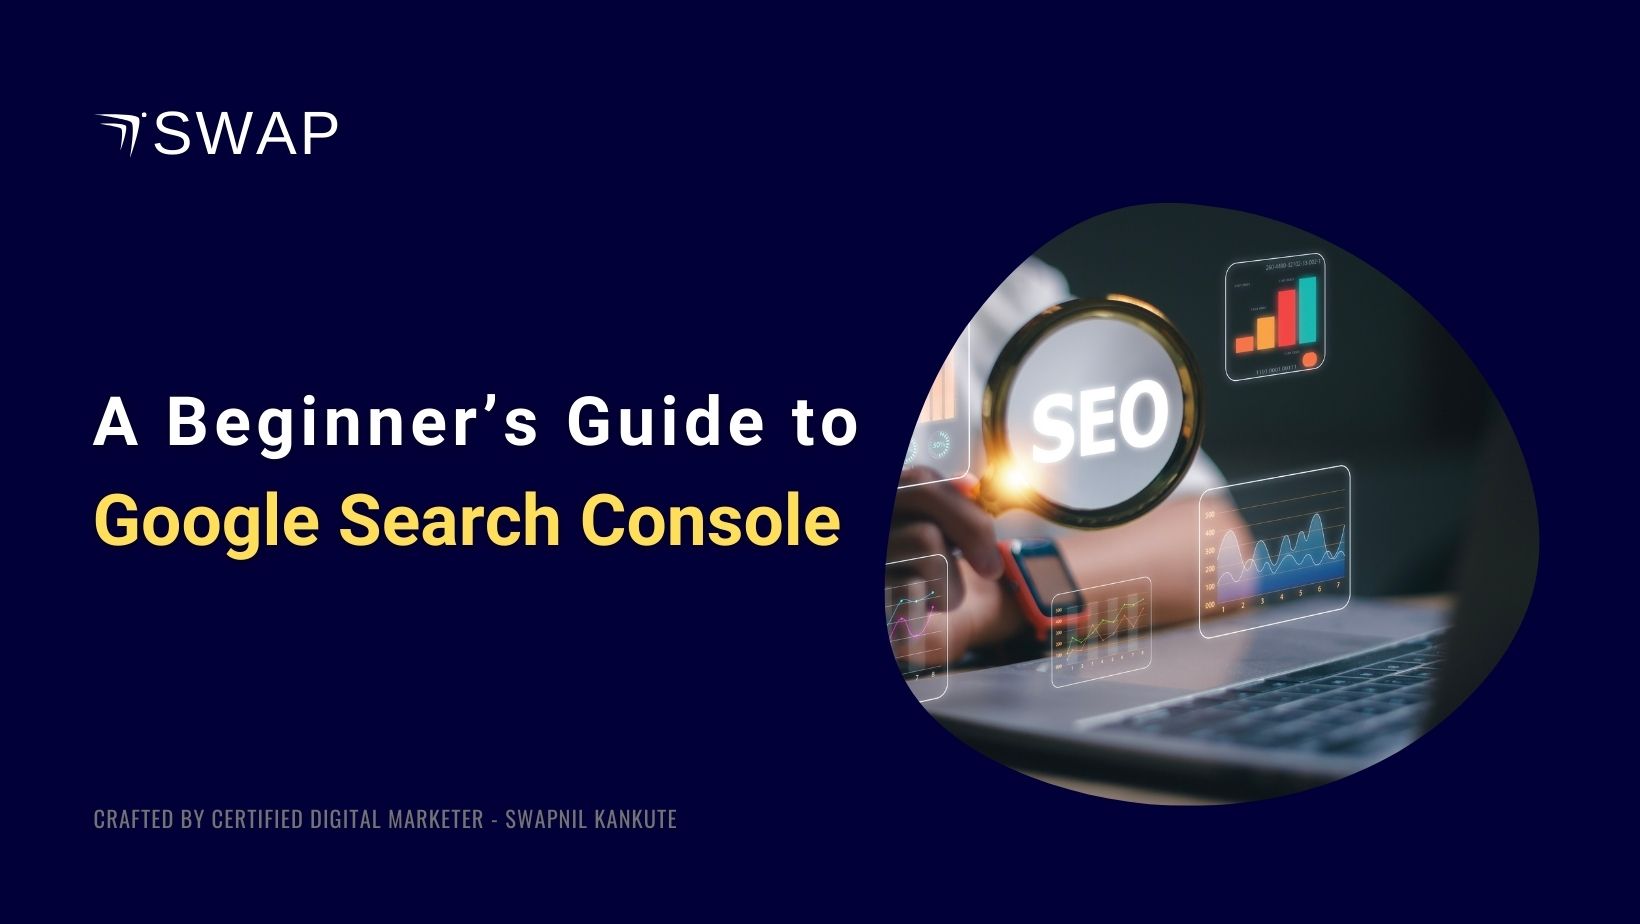 A Beginner’s Guide to Google Search Console